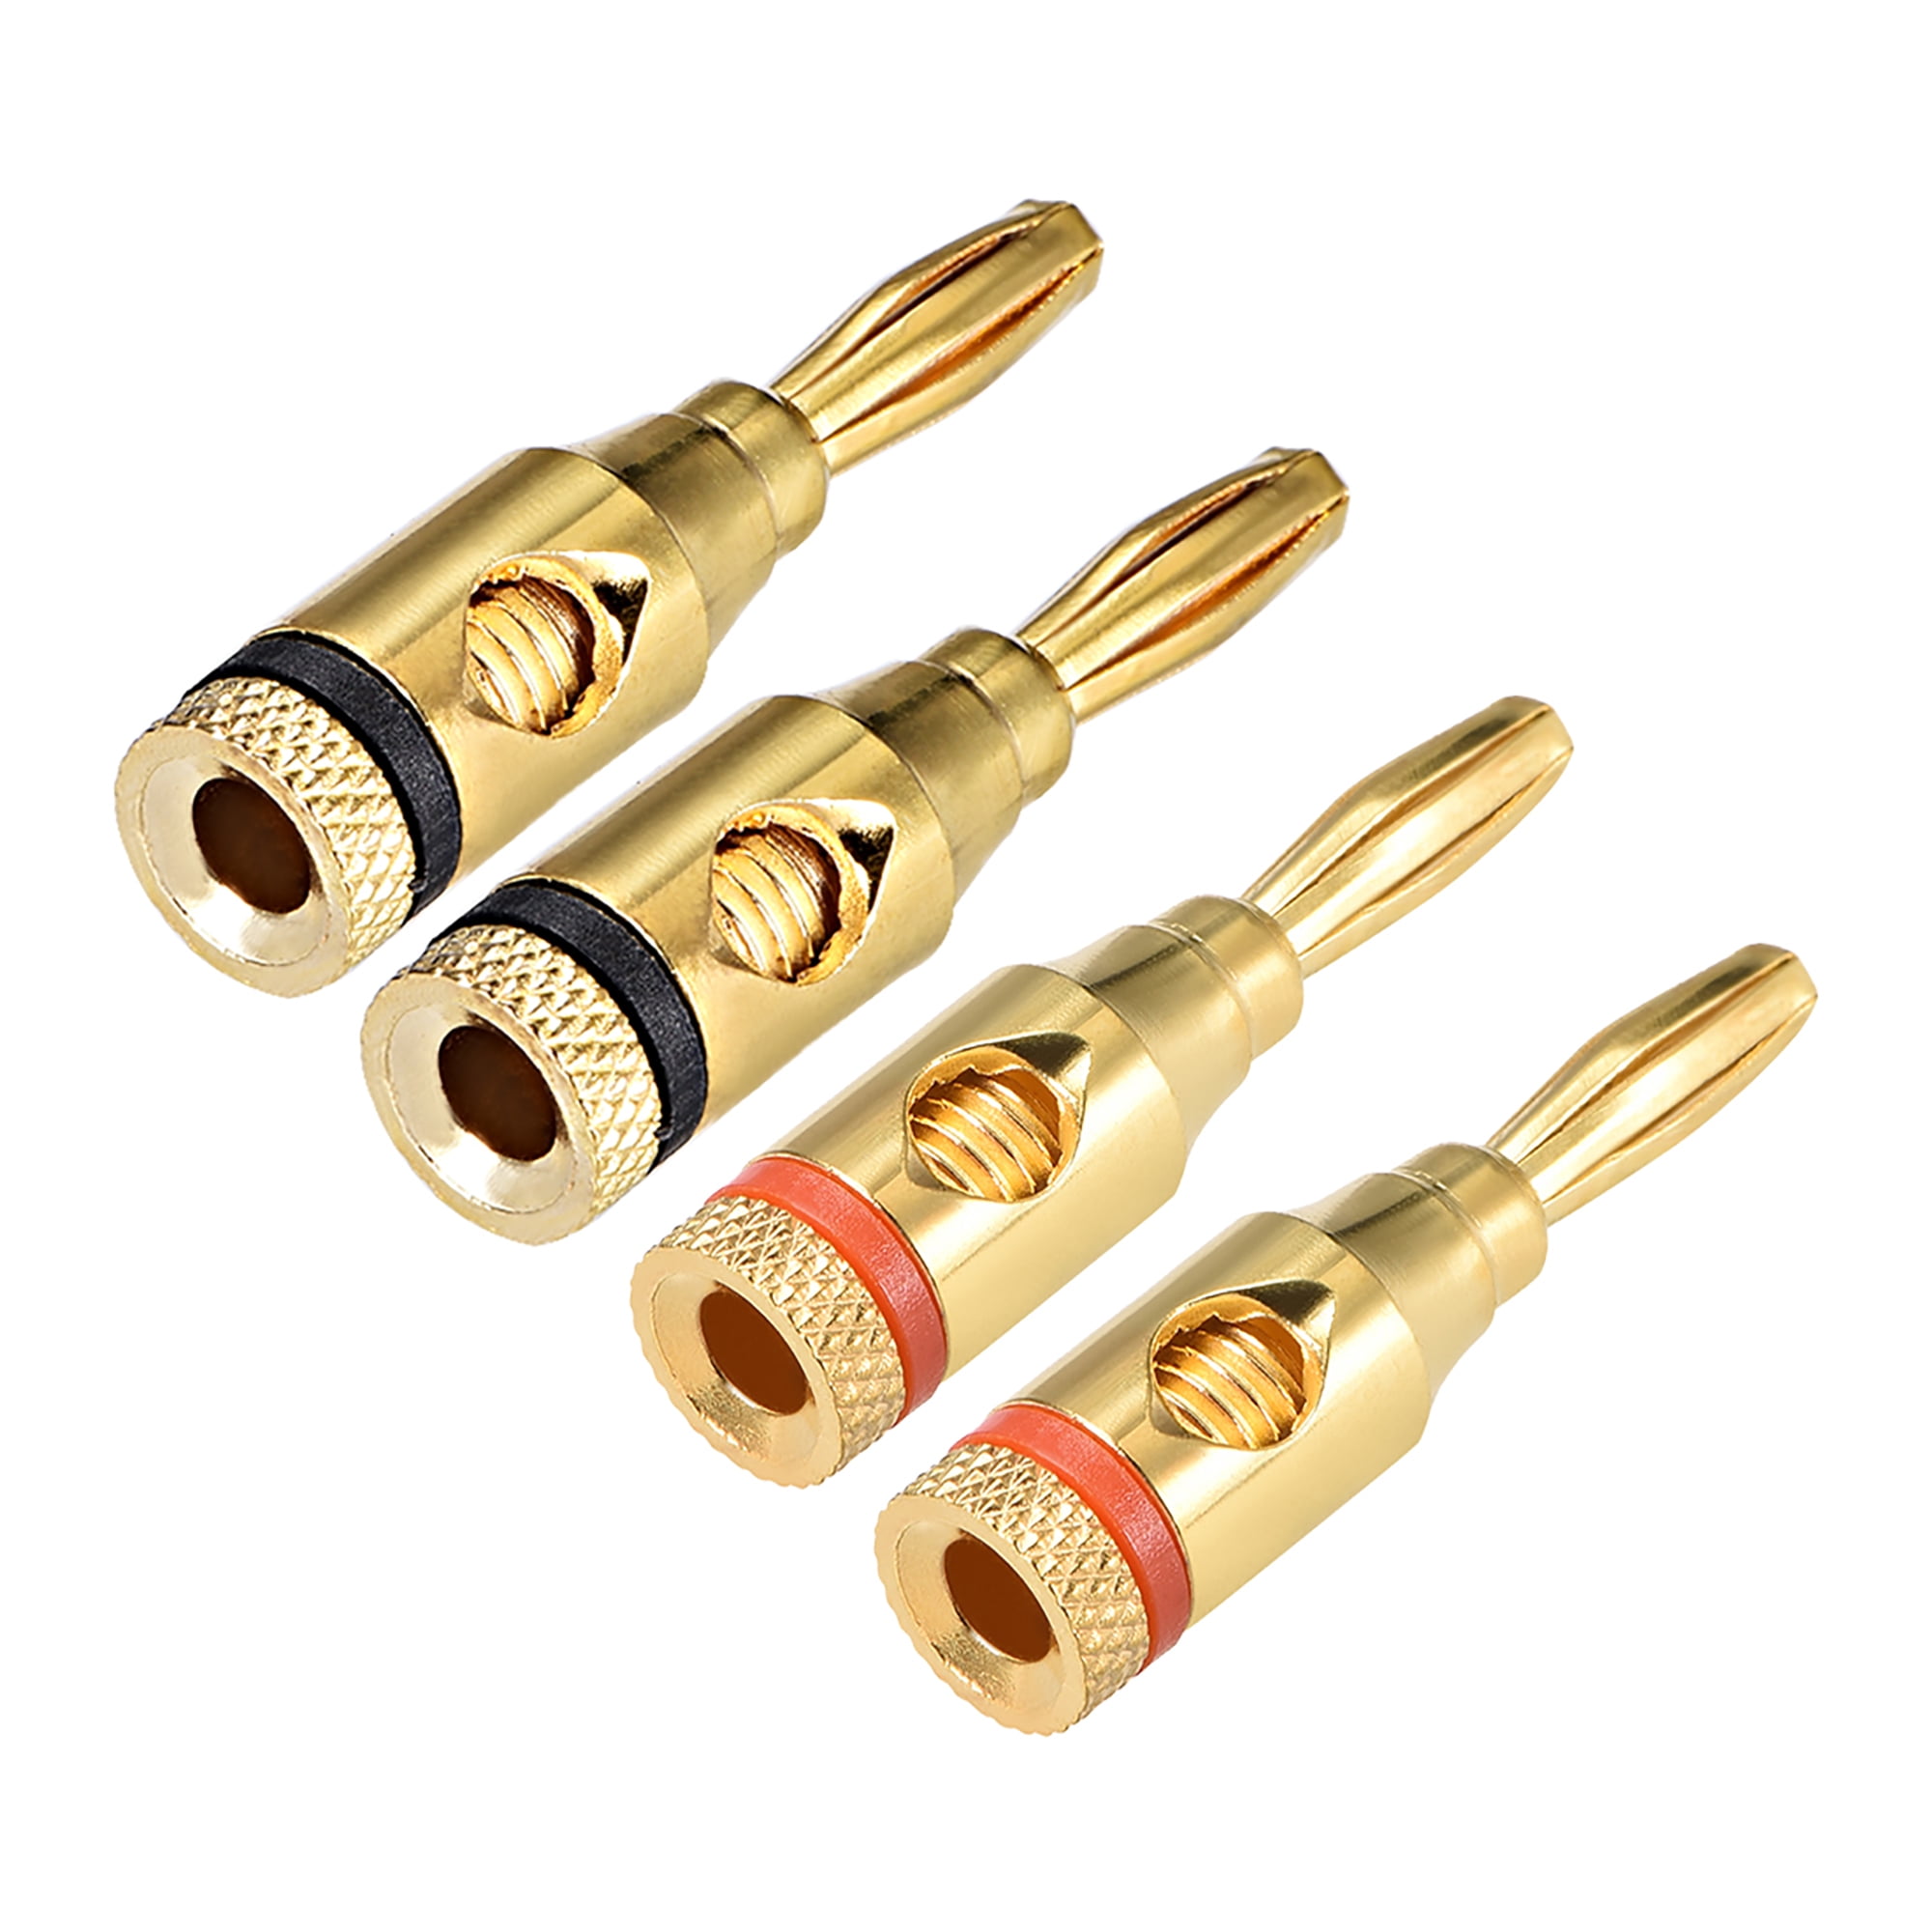 Gold 4mm Plated Banana Connector Open Screw Type 4pcs for Speaker Wire What Wire Goes To Gold Screw